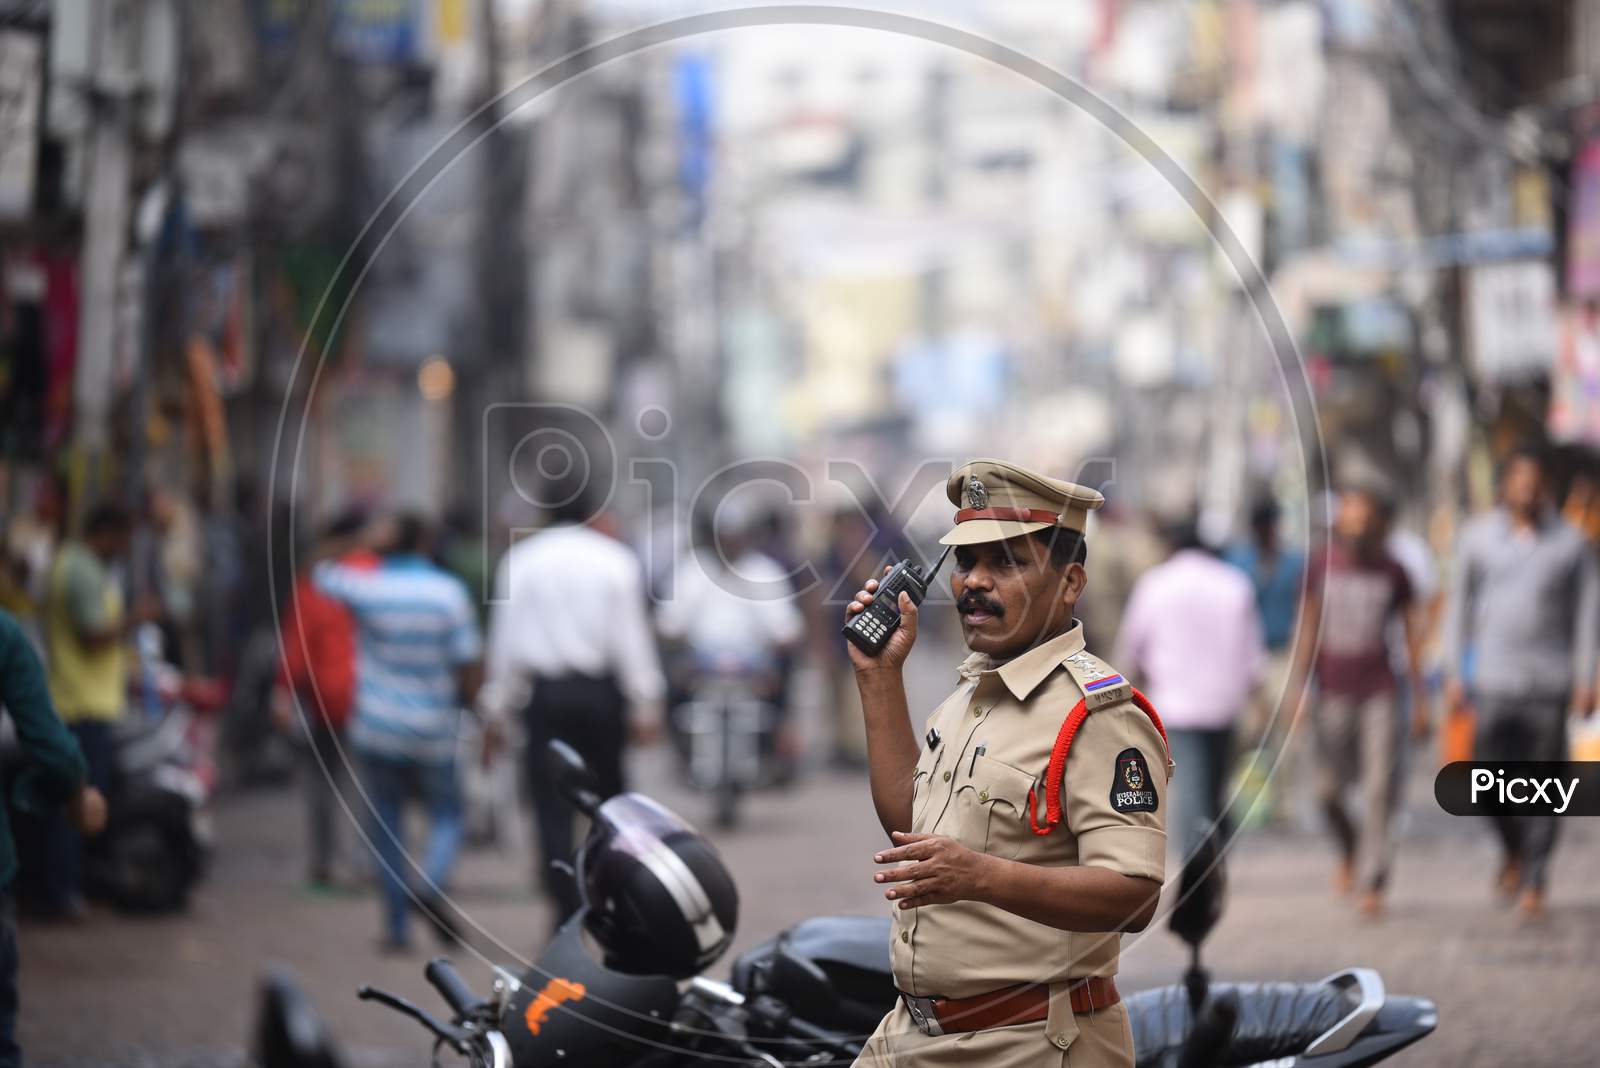 Police protection at Lad Bazaar to detain protesters against CAA 2019